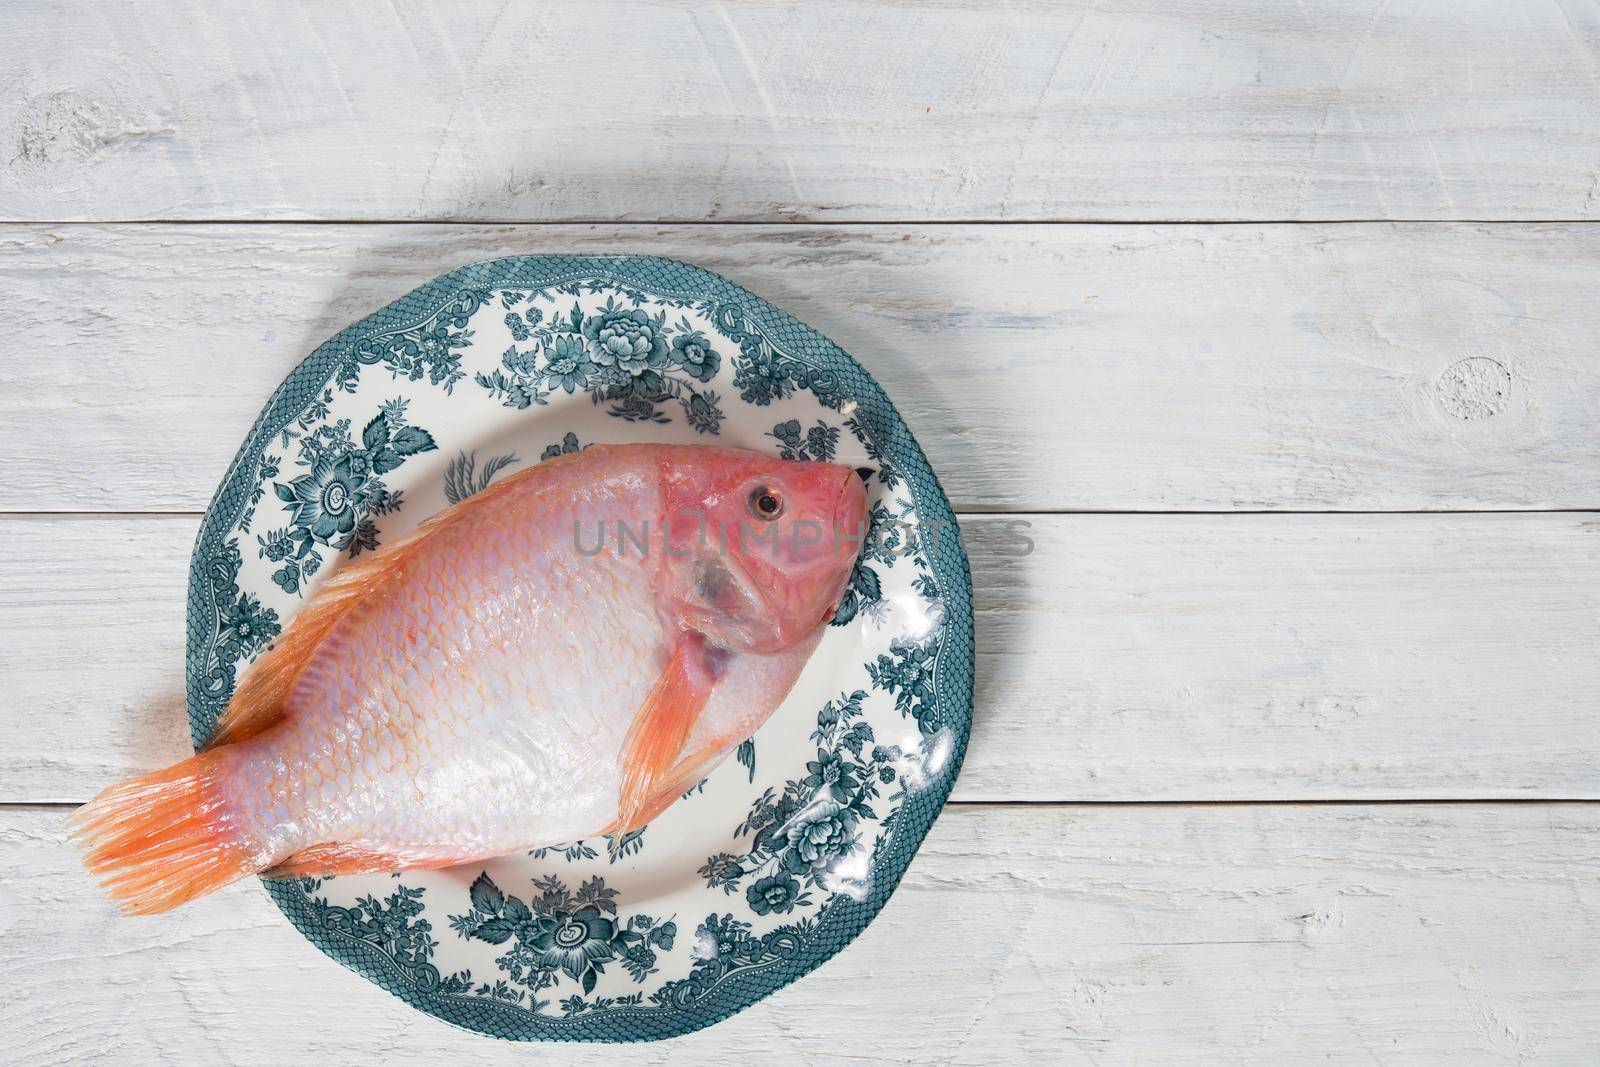 raw pink tilapia fish lies on a plate with blue ornaments on white wooden boards, copy space. High quality photo